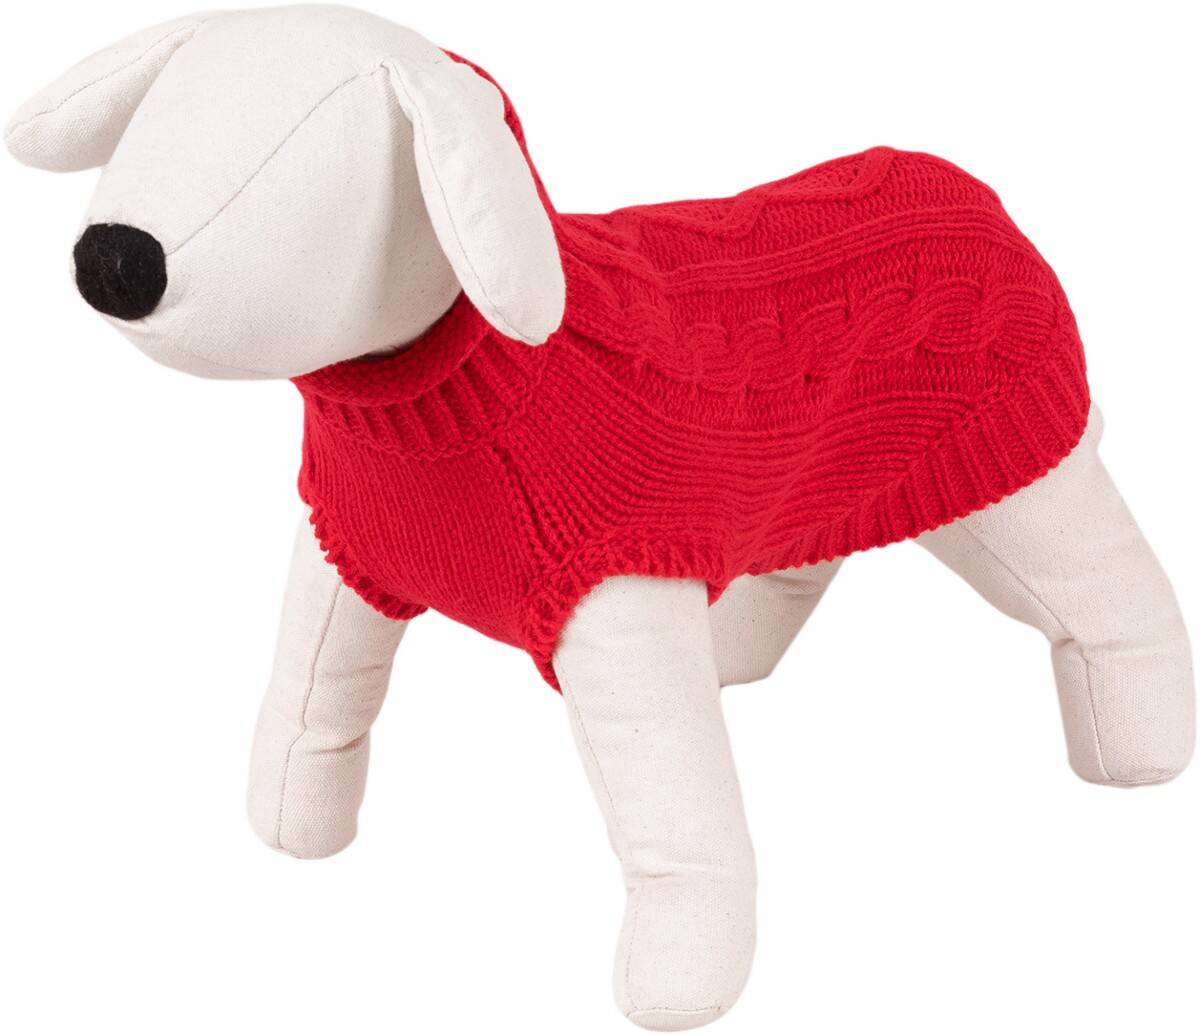 Dog Sweater / Knitted Pattern - Happet 51XL - Red XL - 40cm